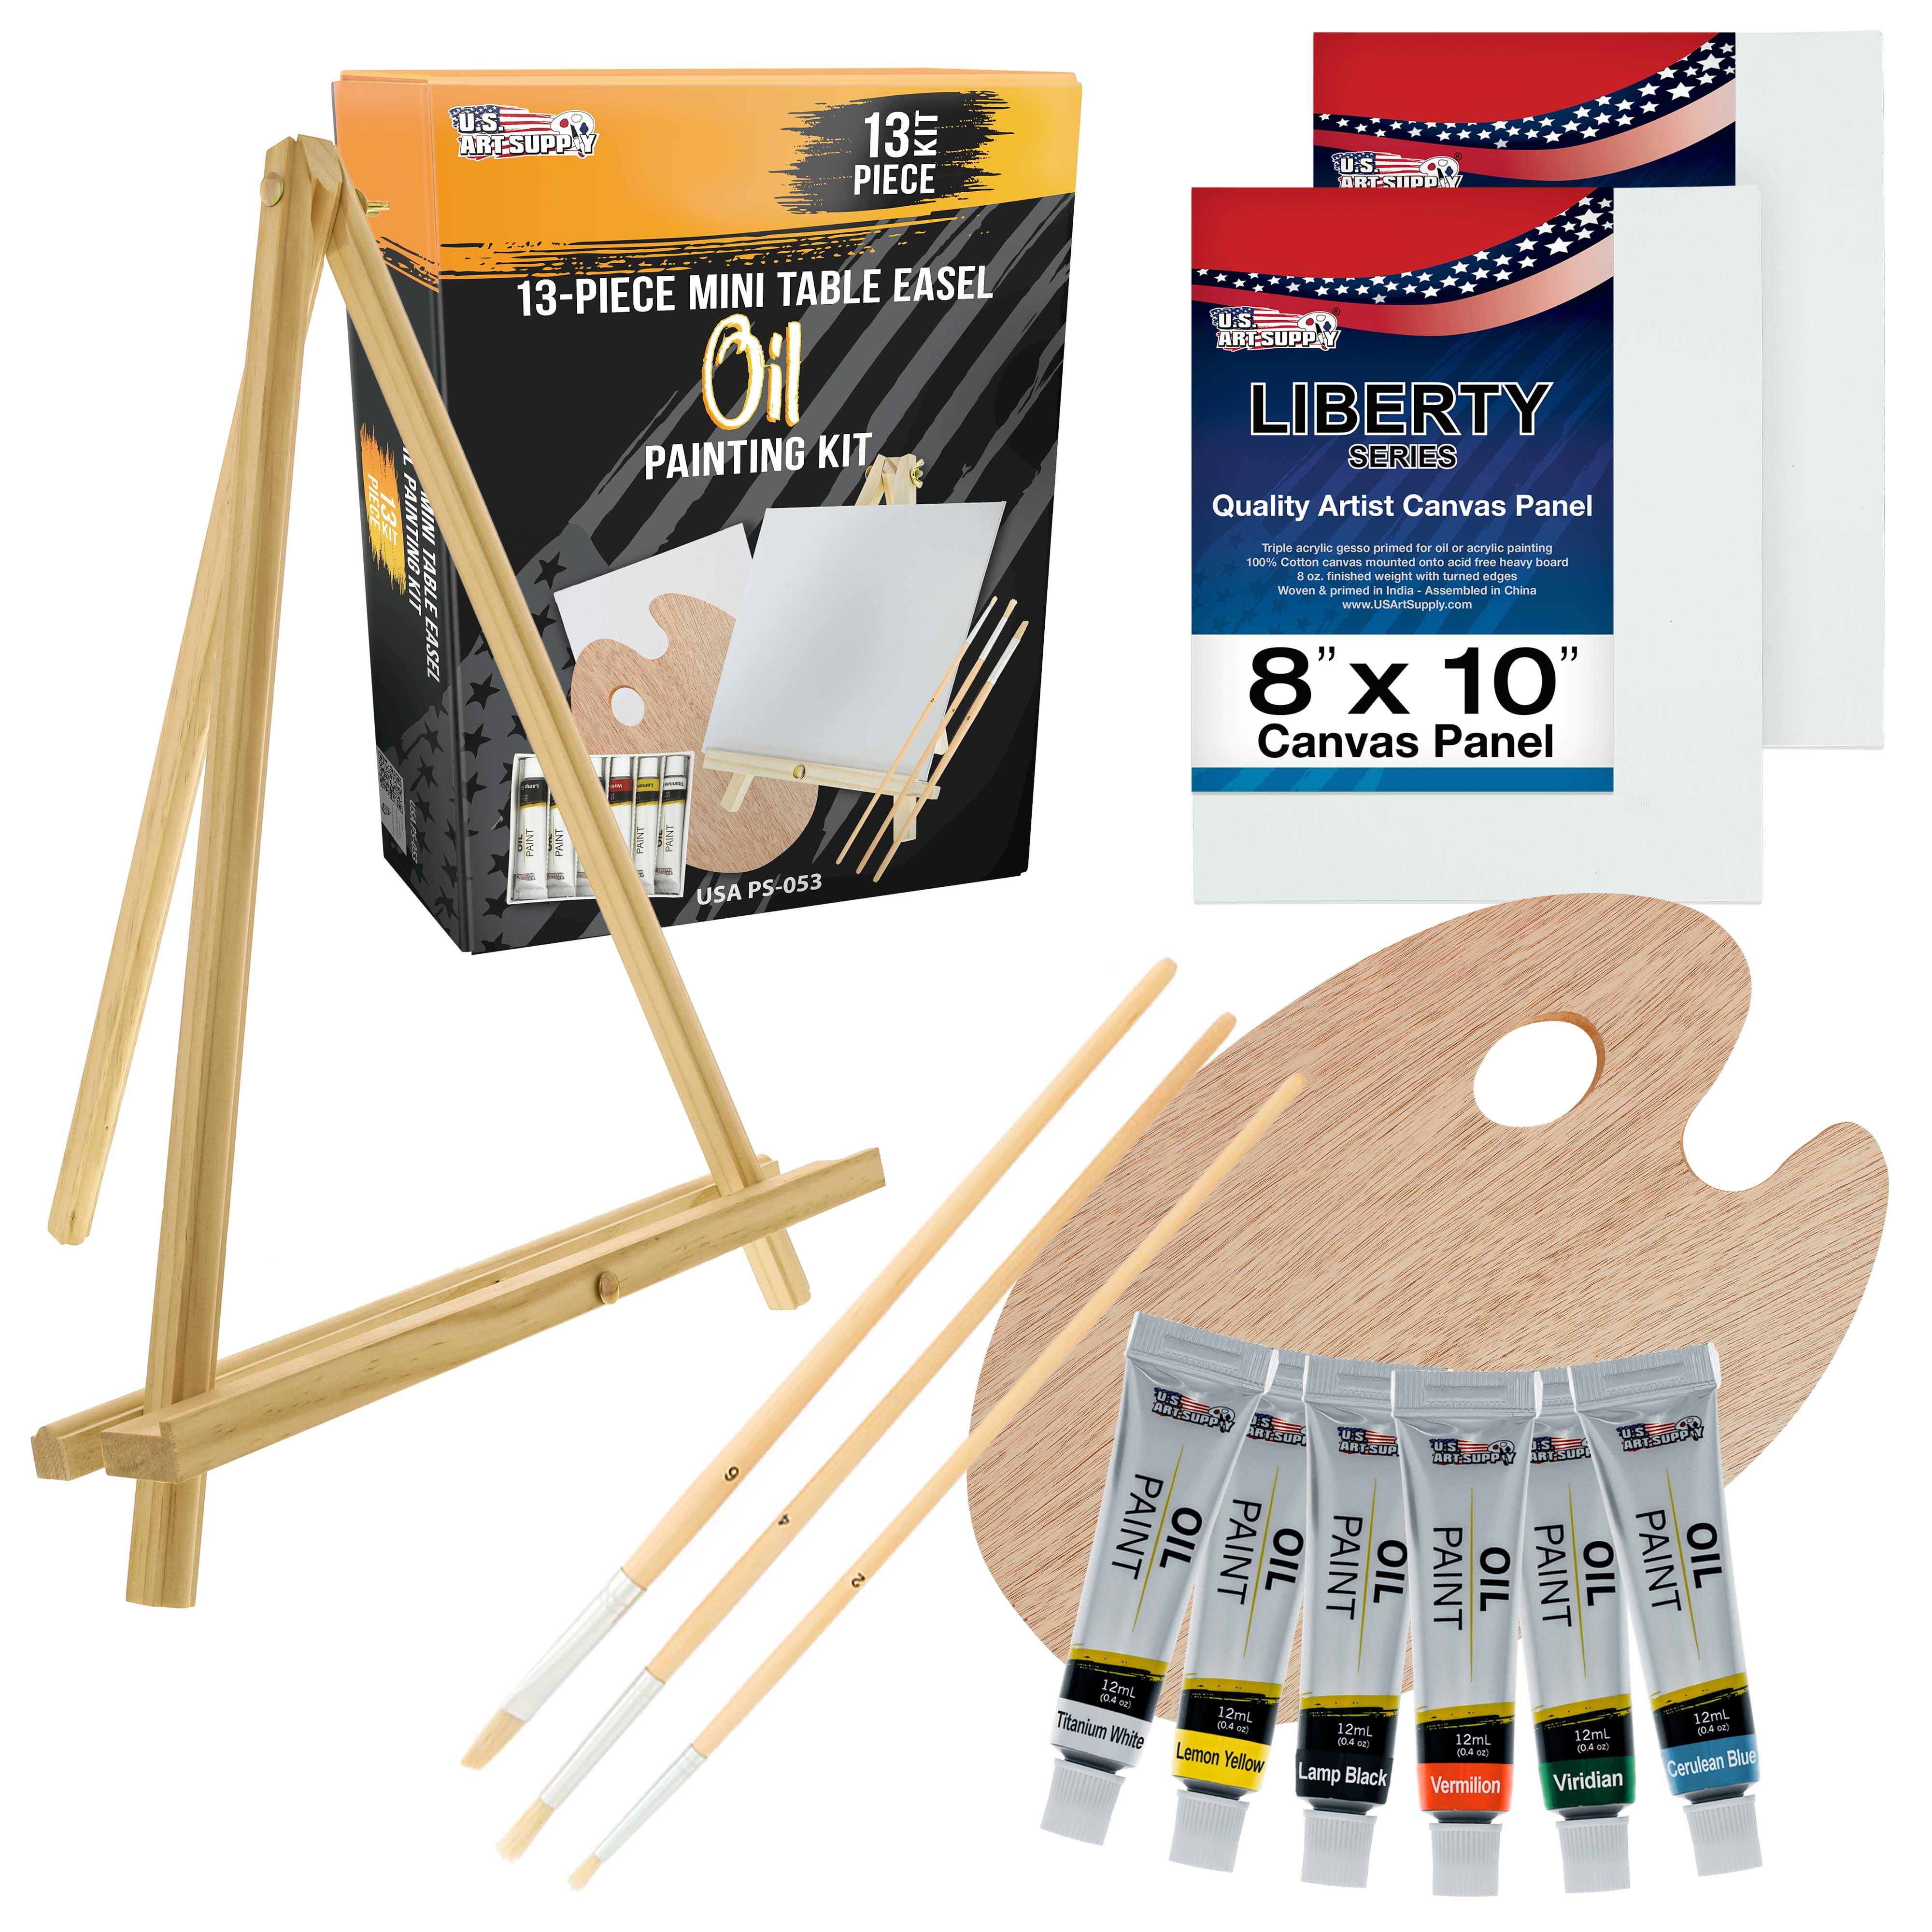 U.S. Art Supply 14-Piece Artist Painting Set with 6 Vivid Oil Paint Colors,  12 Easel, 2 Canvas Panels, 3 Brushes, Wood Painting Palette - Fun